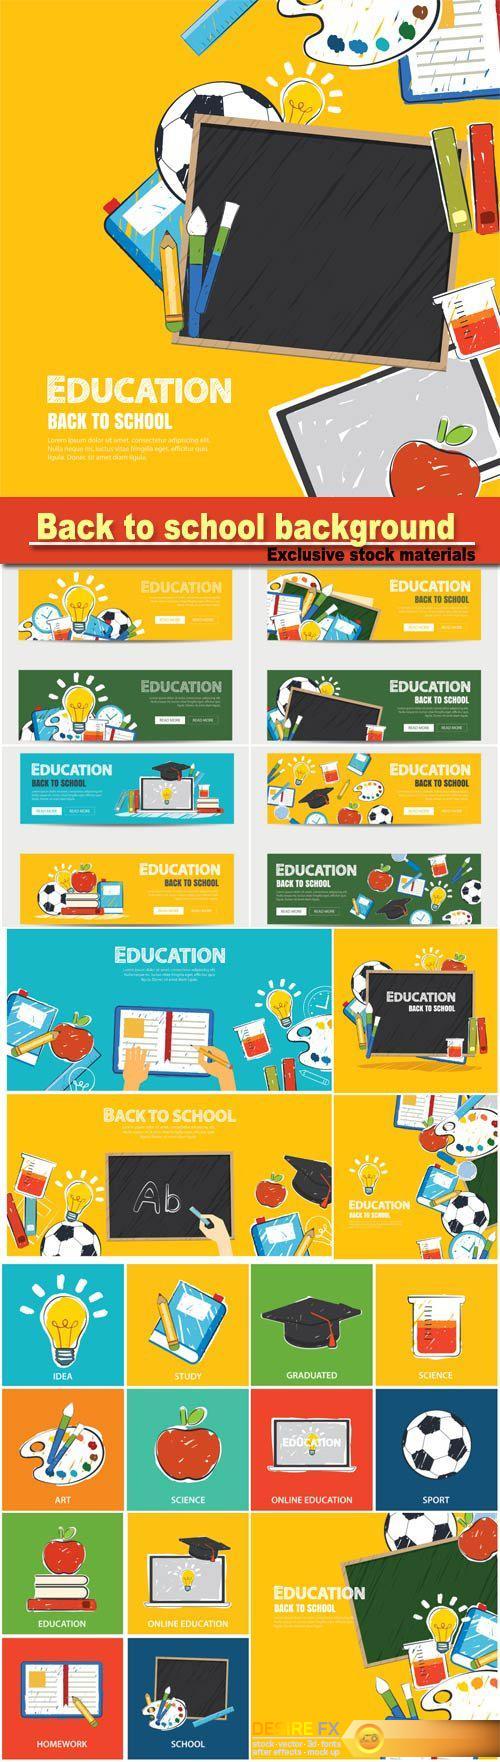 Education banner and back to school background template